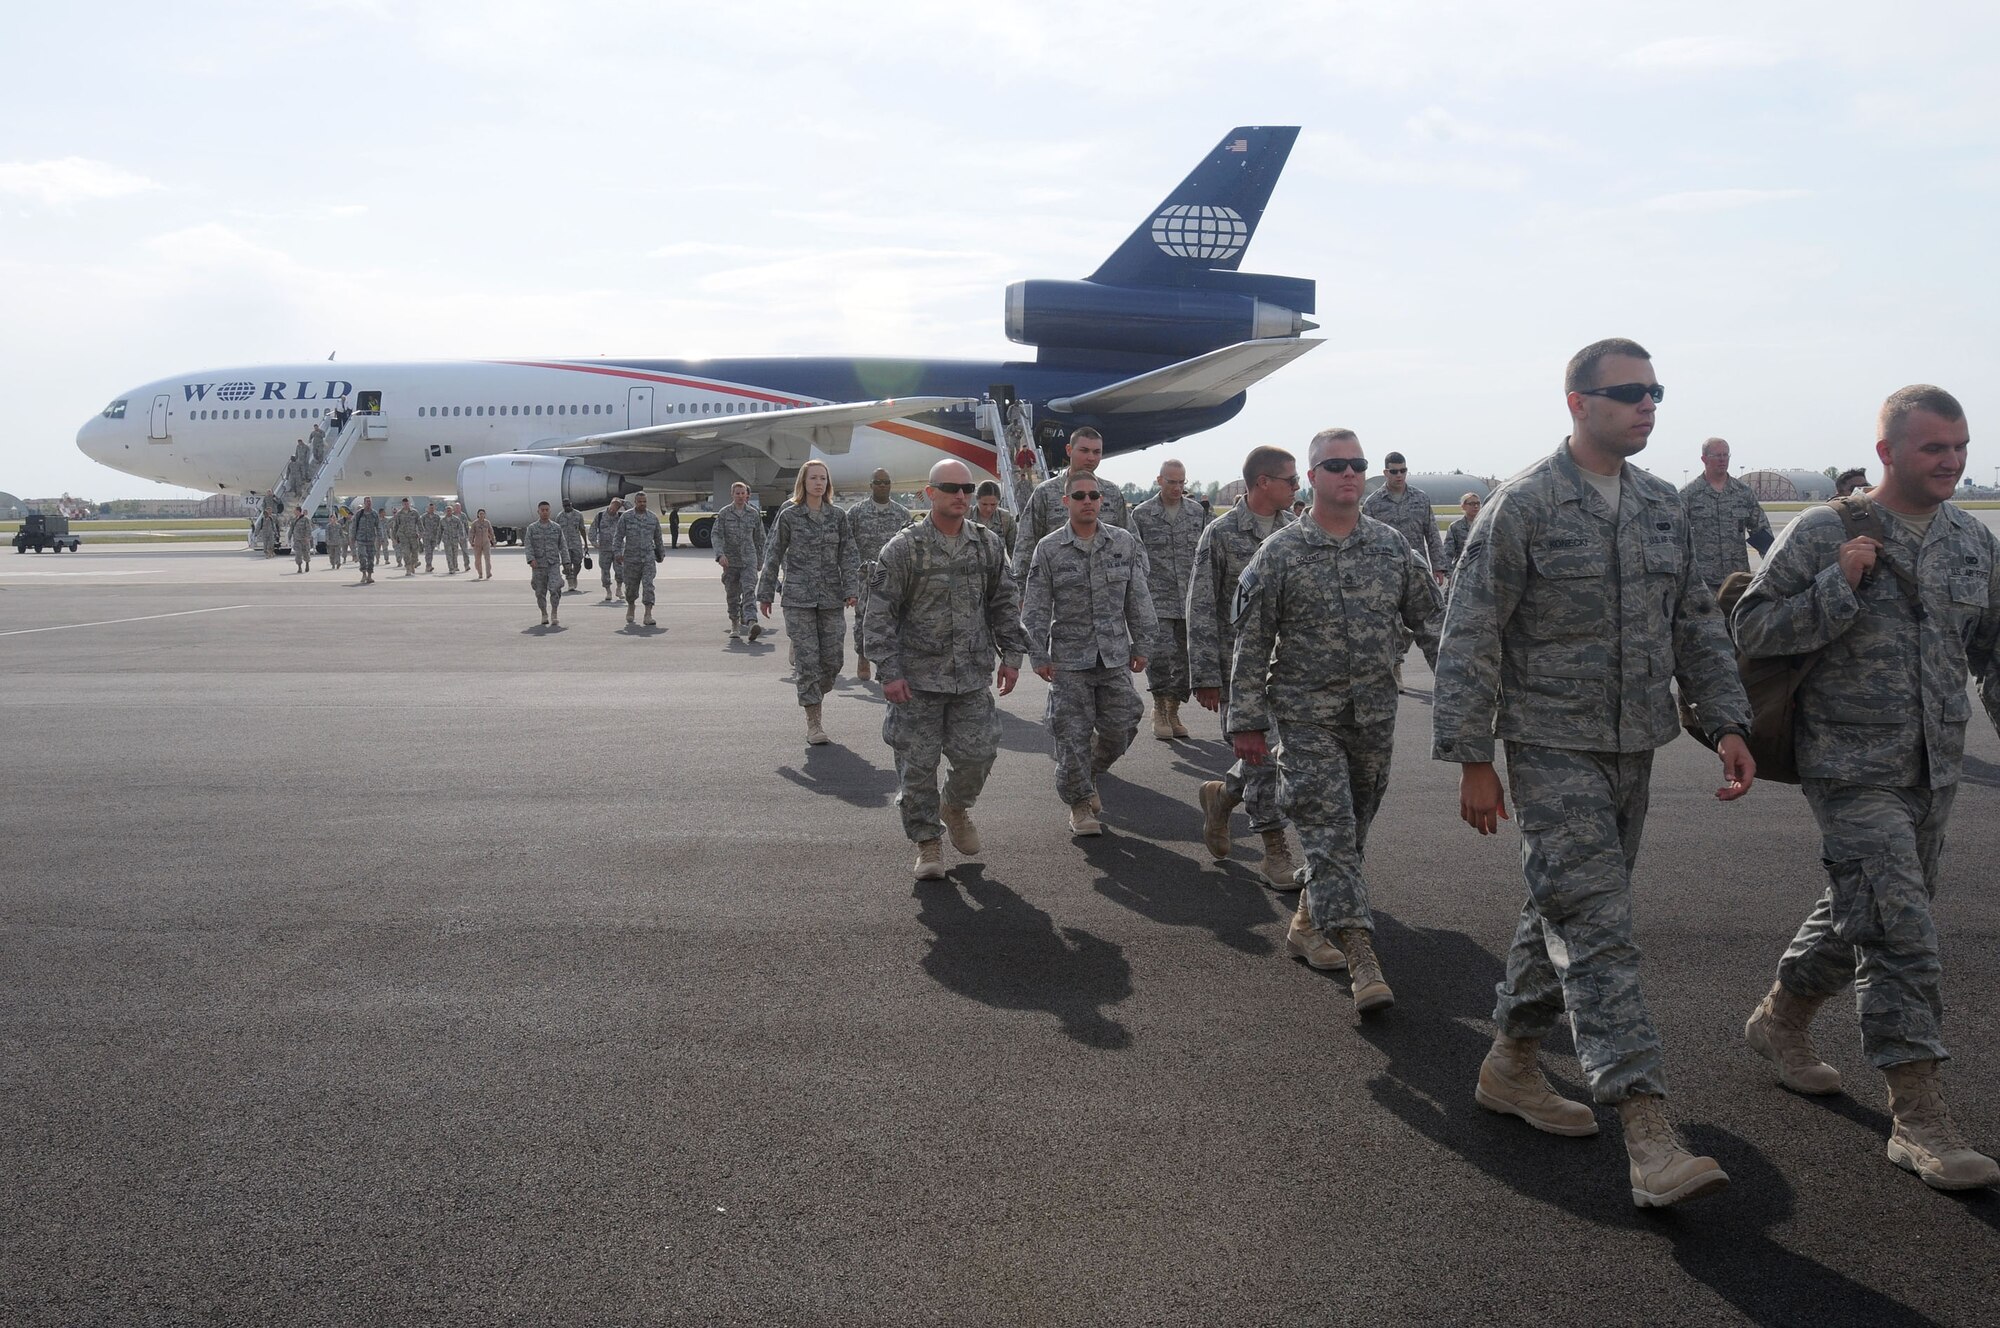 Military servicemembers returning from deployment disembark a government chartered aircraft arriving from an air base in Southwest Asia, Sept. 11, 2009 at Aviano Air Base, Italy.  The servicemembers were amongst the first to utilize the new passenger and air freight terminal at Aviano AB since it opened for passenger processing Sept. 10.  (U.S. Air Force photo/Airman 1st Class Ashley Wood)